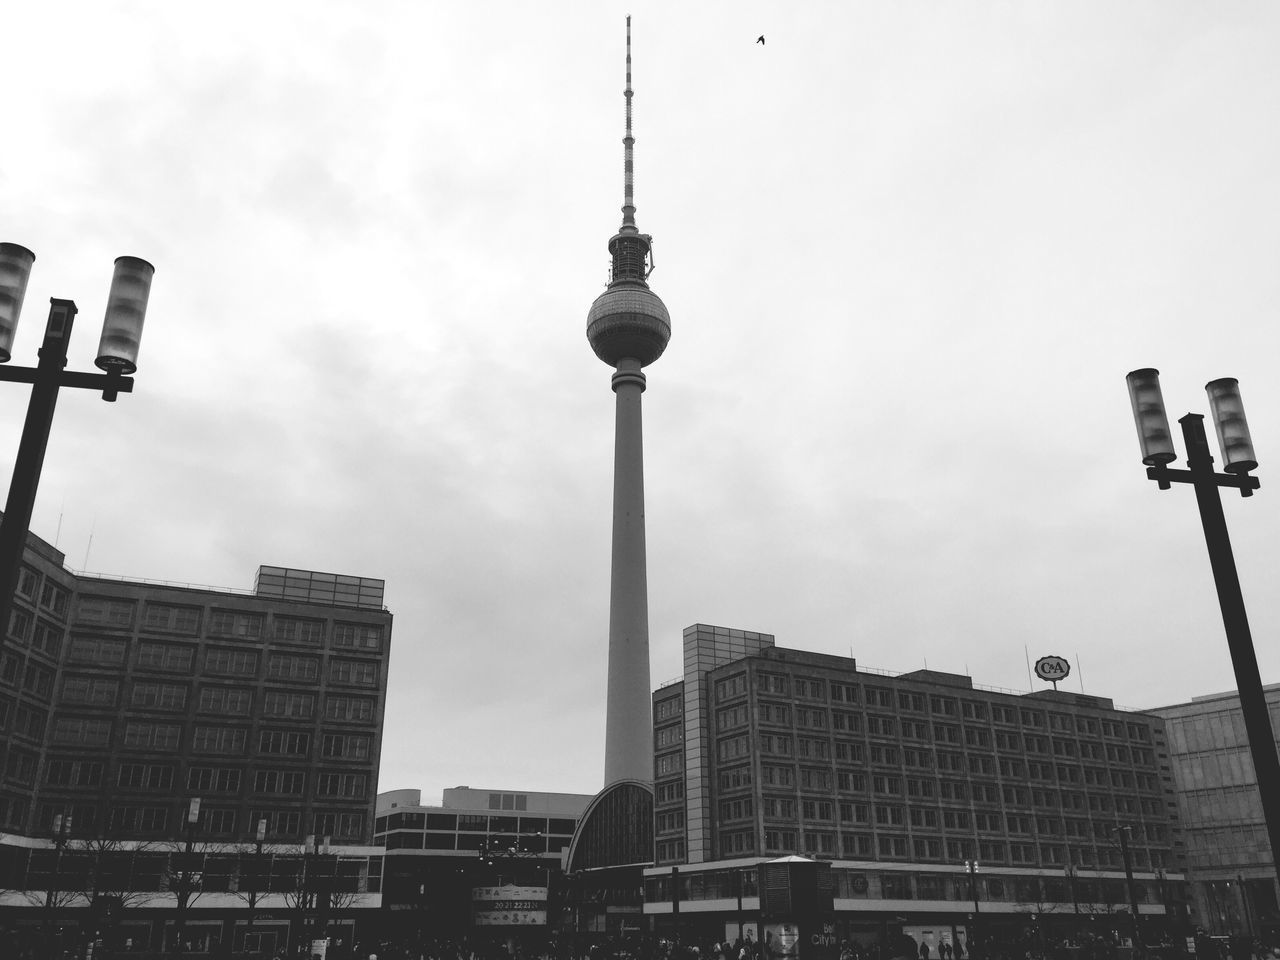 building exterior, architecture, built structure, tower, low angle view, tall - high, communication, communications tower, city, sky, spire, fernsehturm, television tower, skyscraper, culture, capital cities, street light, travel destinations, tall, office building